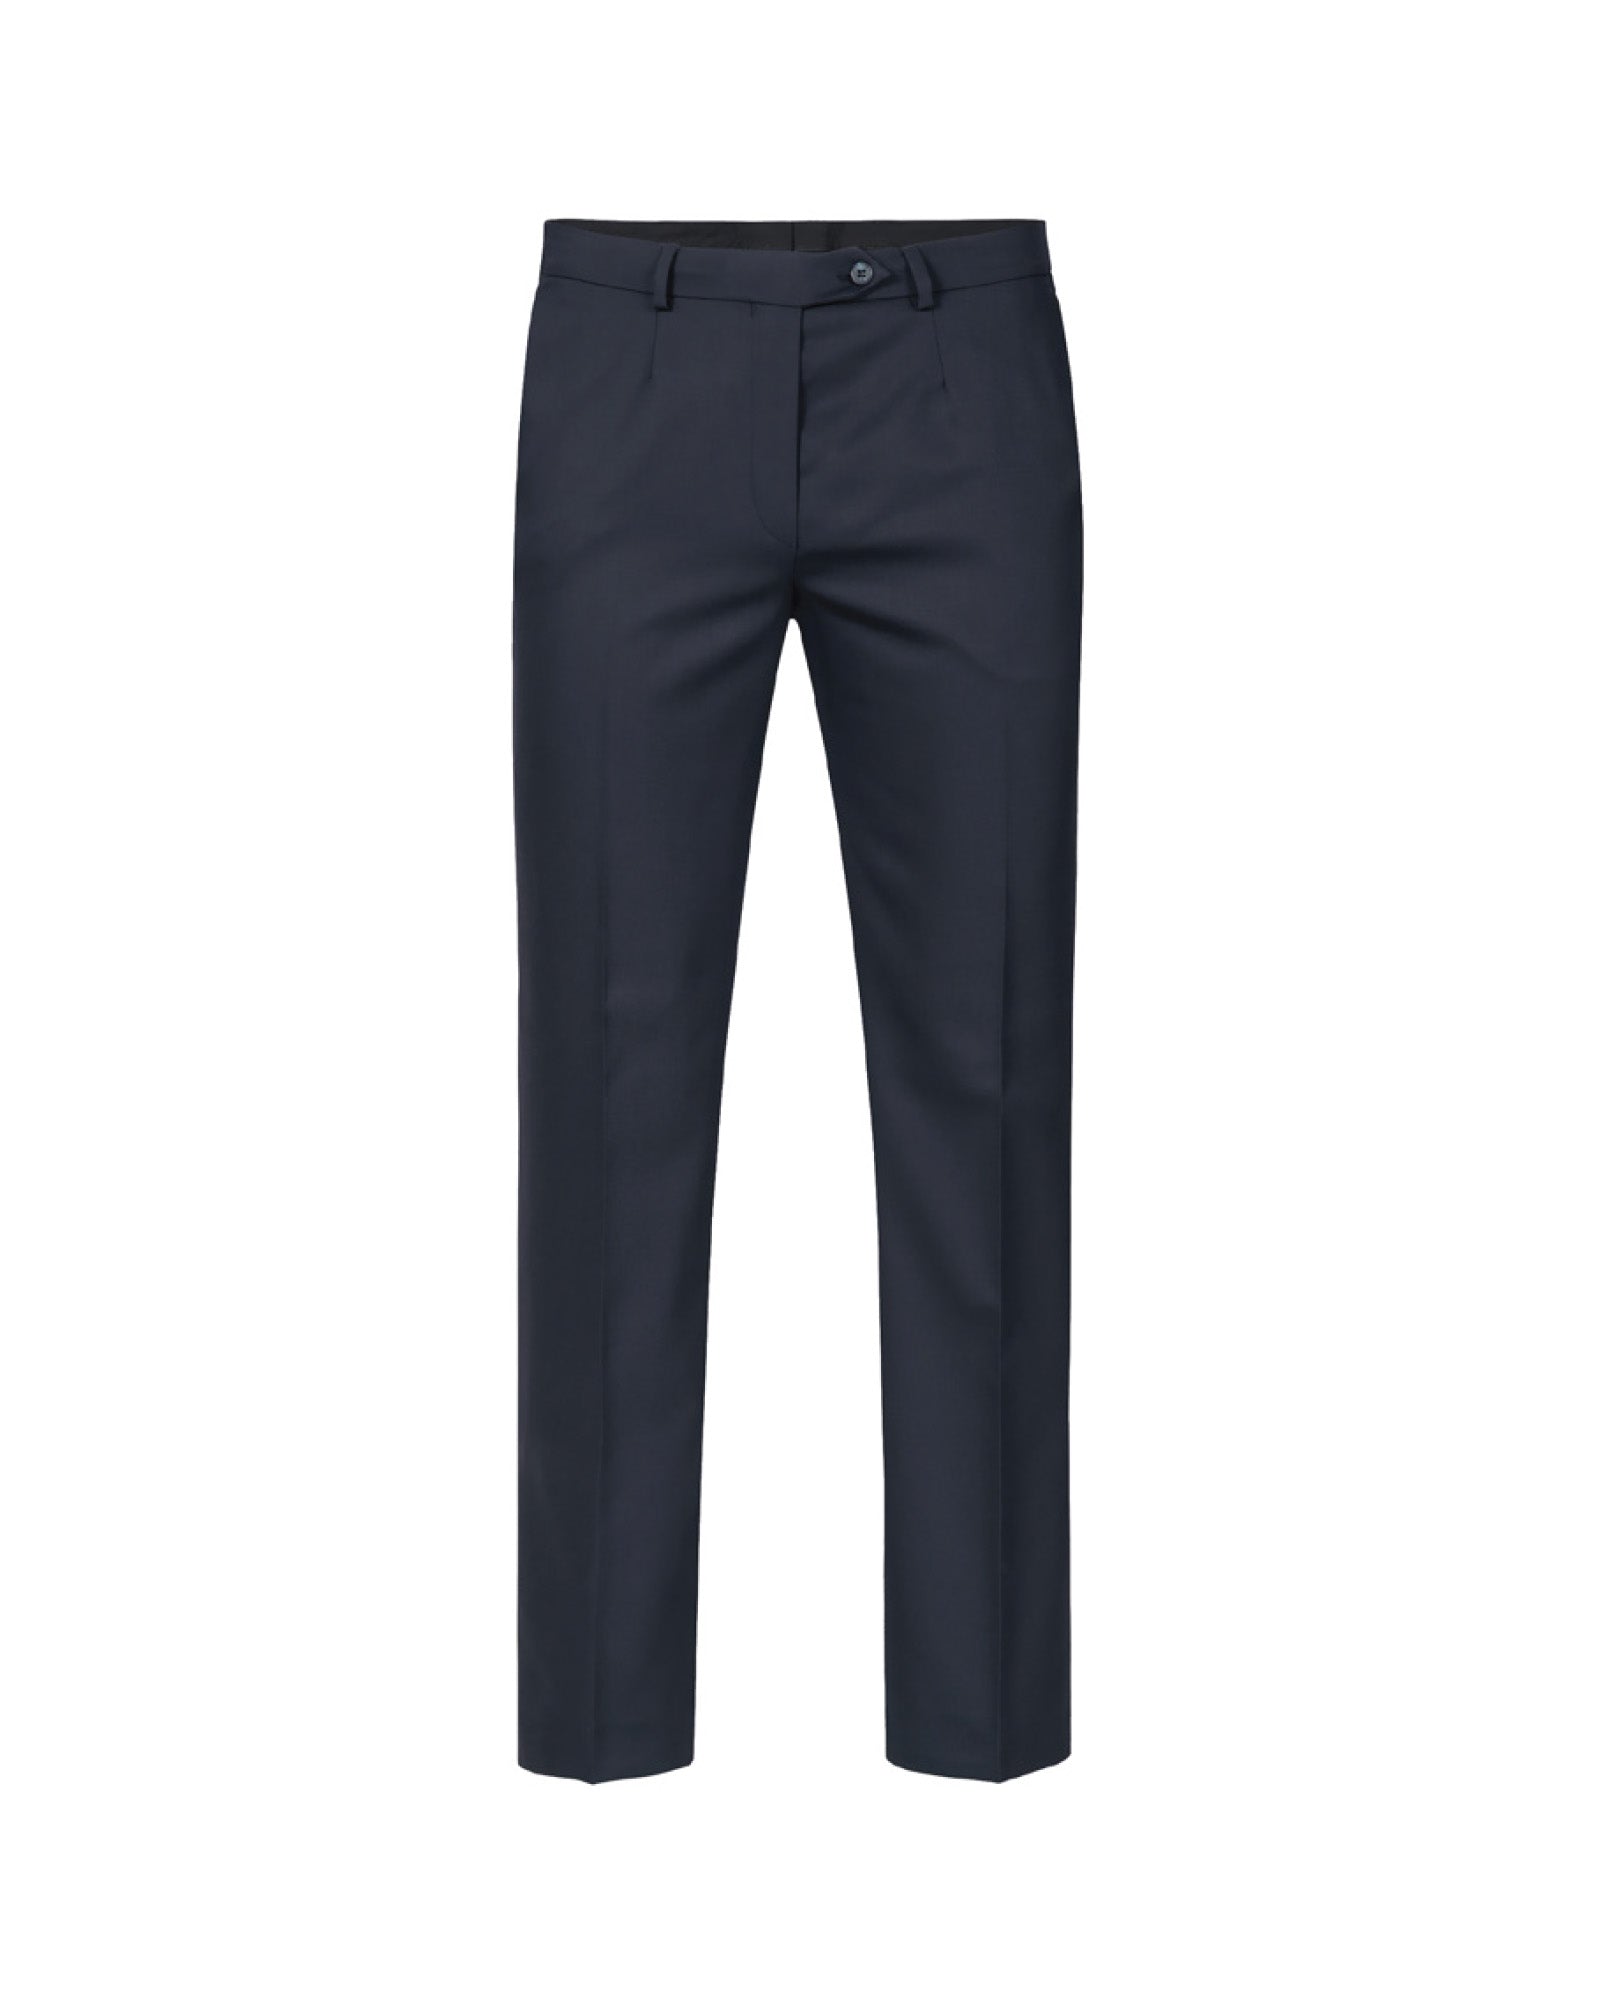 Ladies' outing trousers - Fireman - 50040600